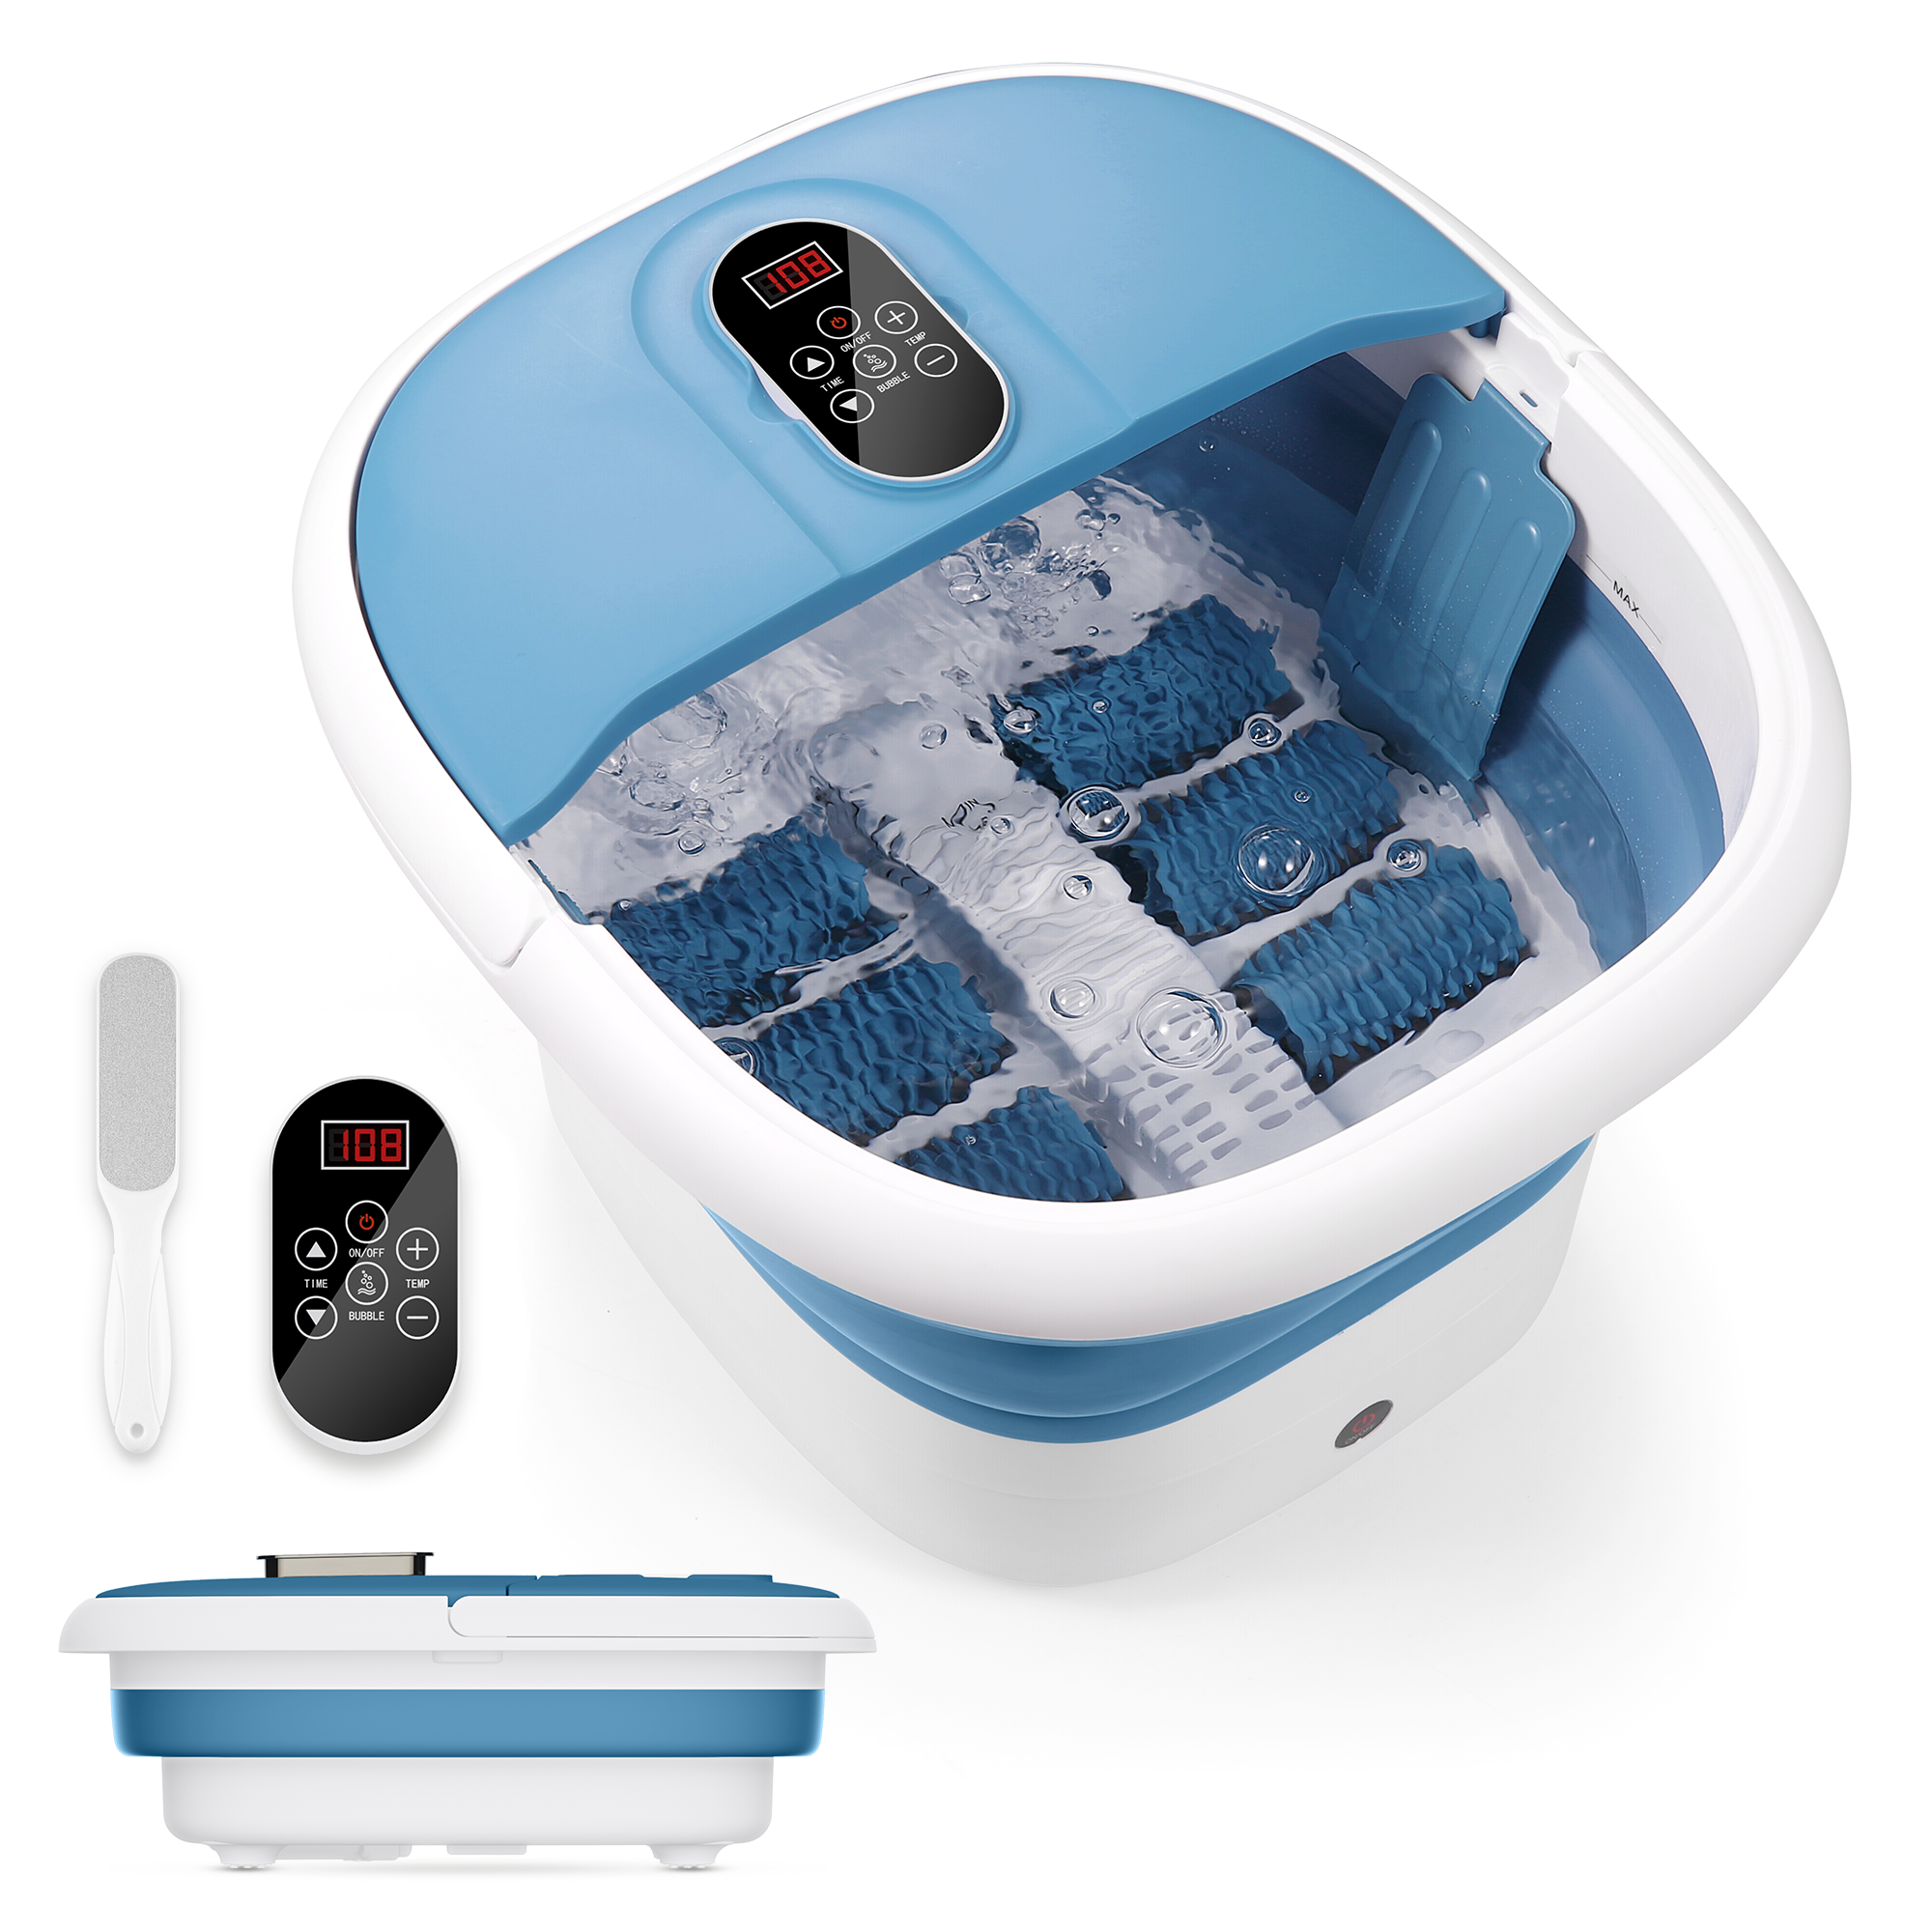 Load image into Gallery viewer, MaxKare-Collapsible-Foot-Spa-Bath-Massager-with-Heat-Digital-Display-Remote-Control-Blue
